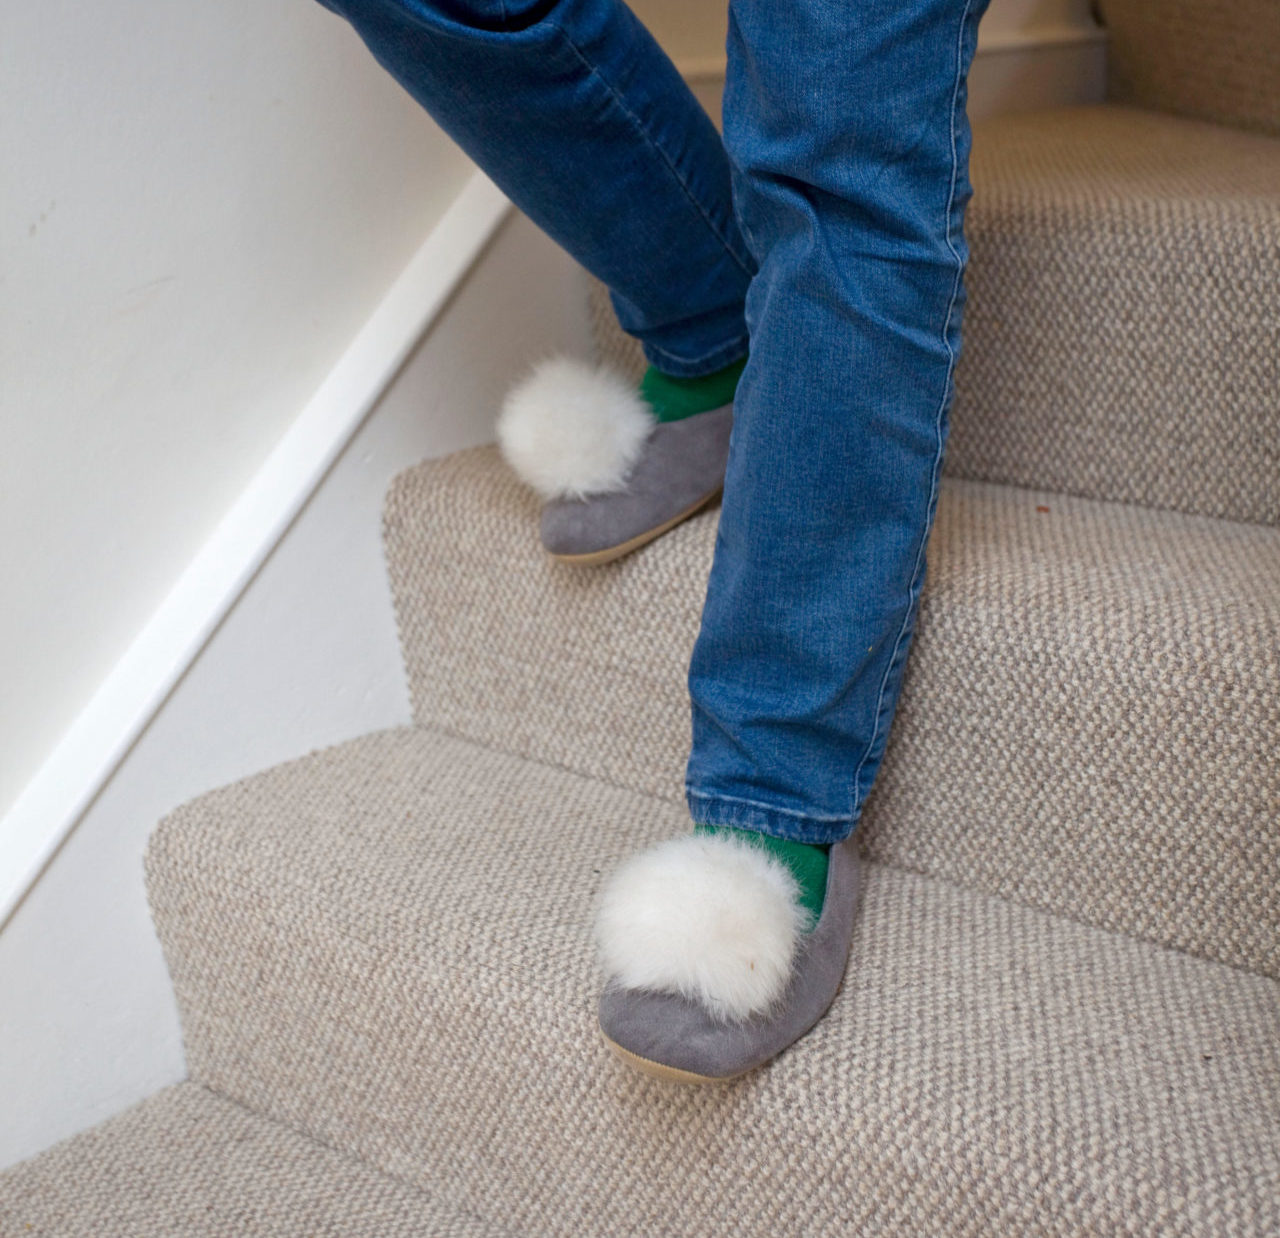 A woman walking down the stairs wearing slippers.